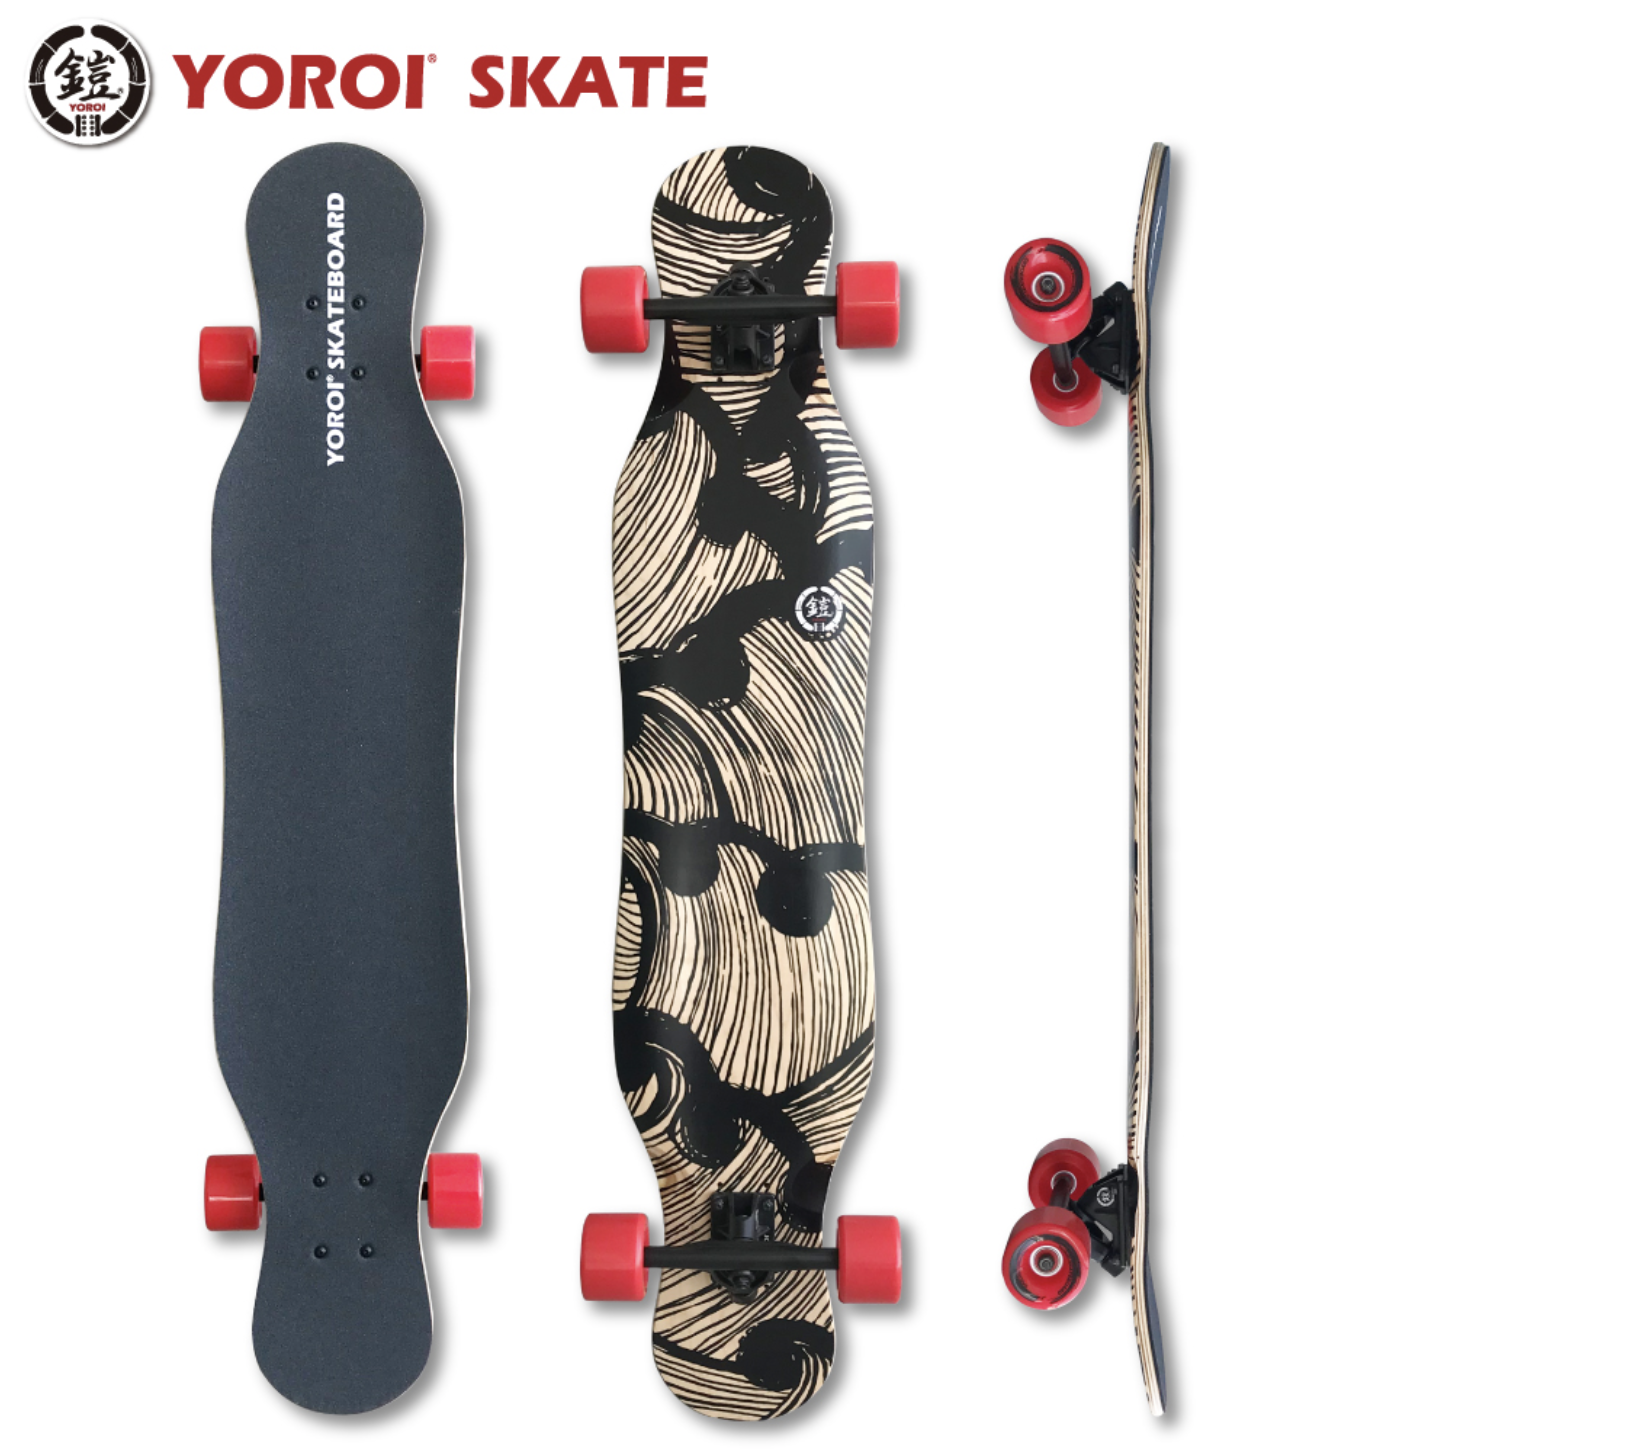 YOROI SKATE BOARD】 JUJU 45 ロングスケートボード - JOINT HOUSE